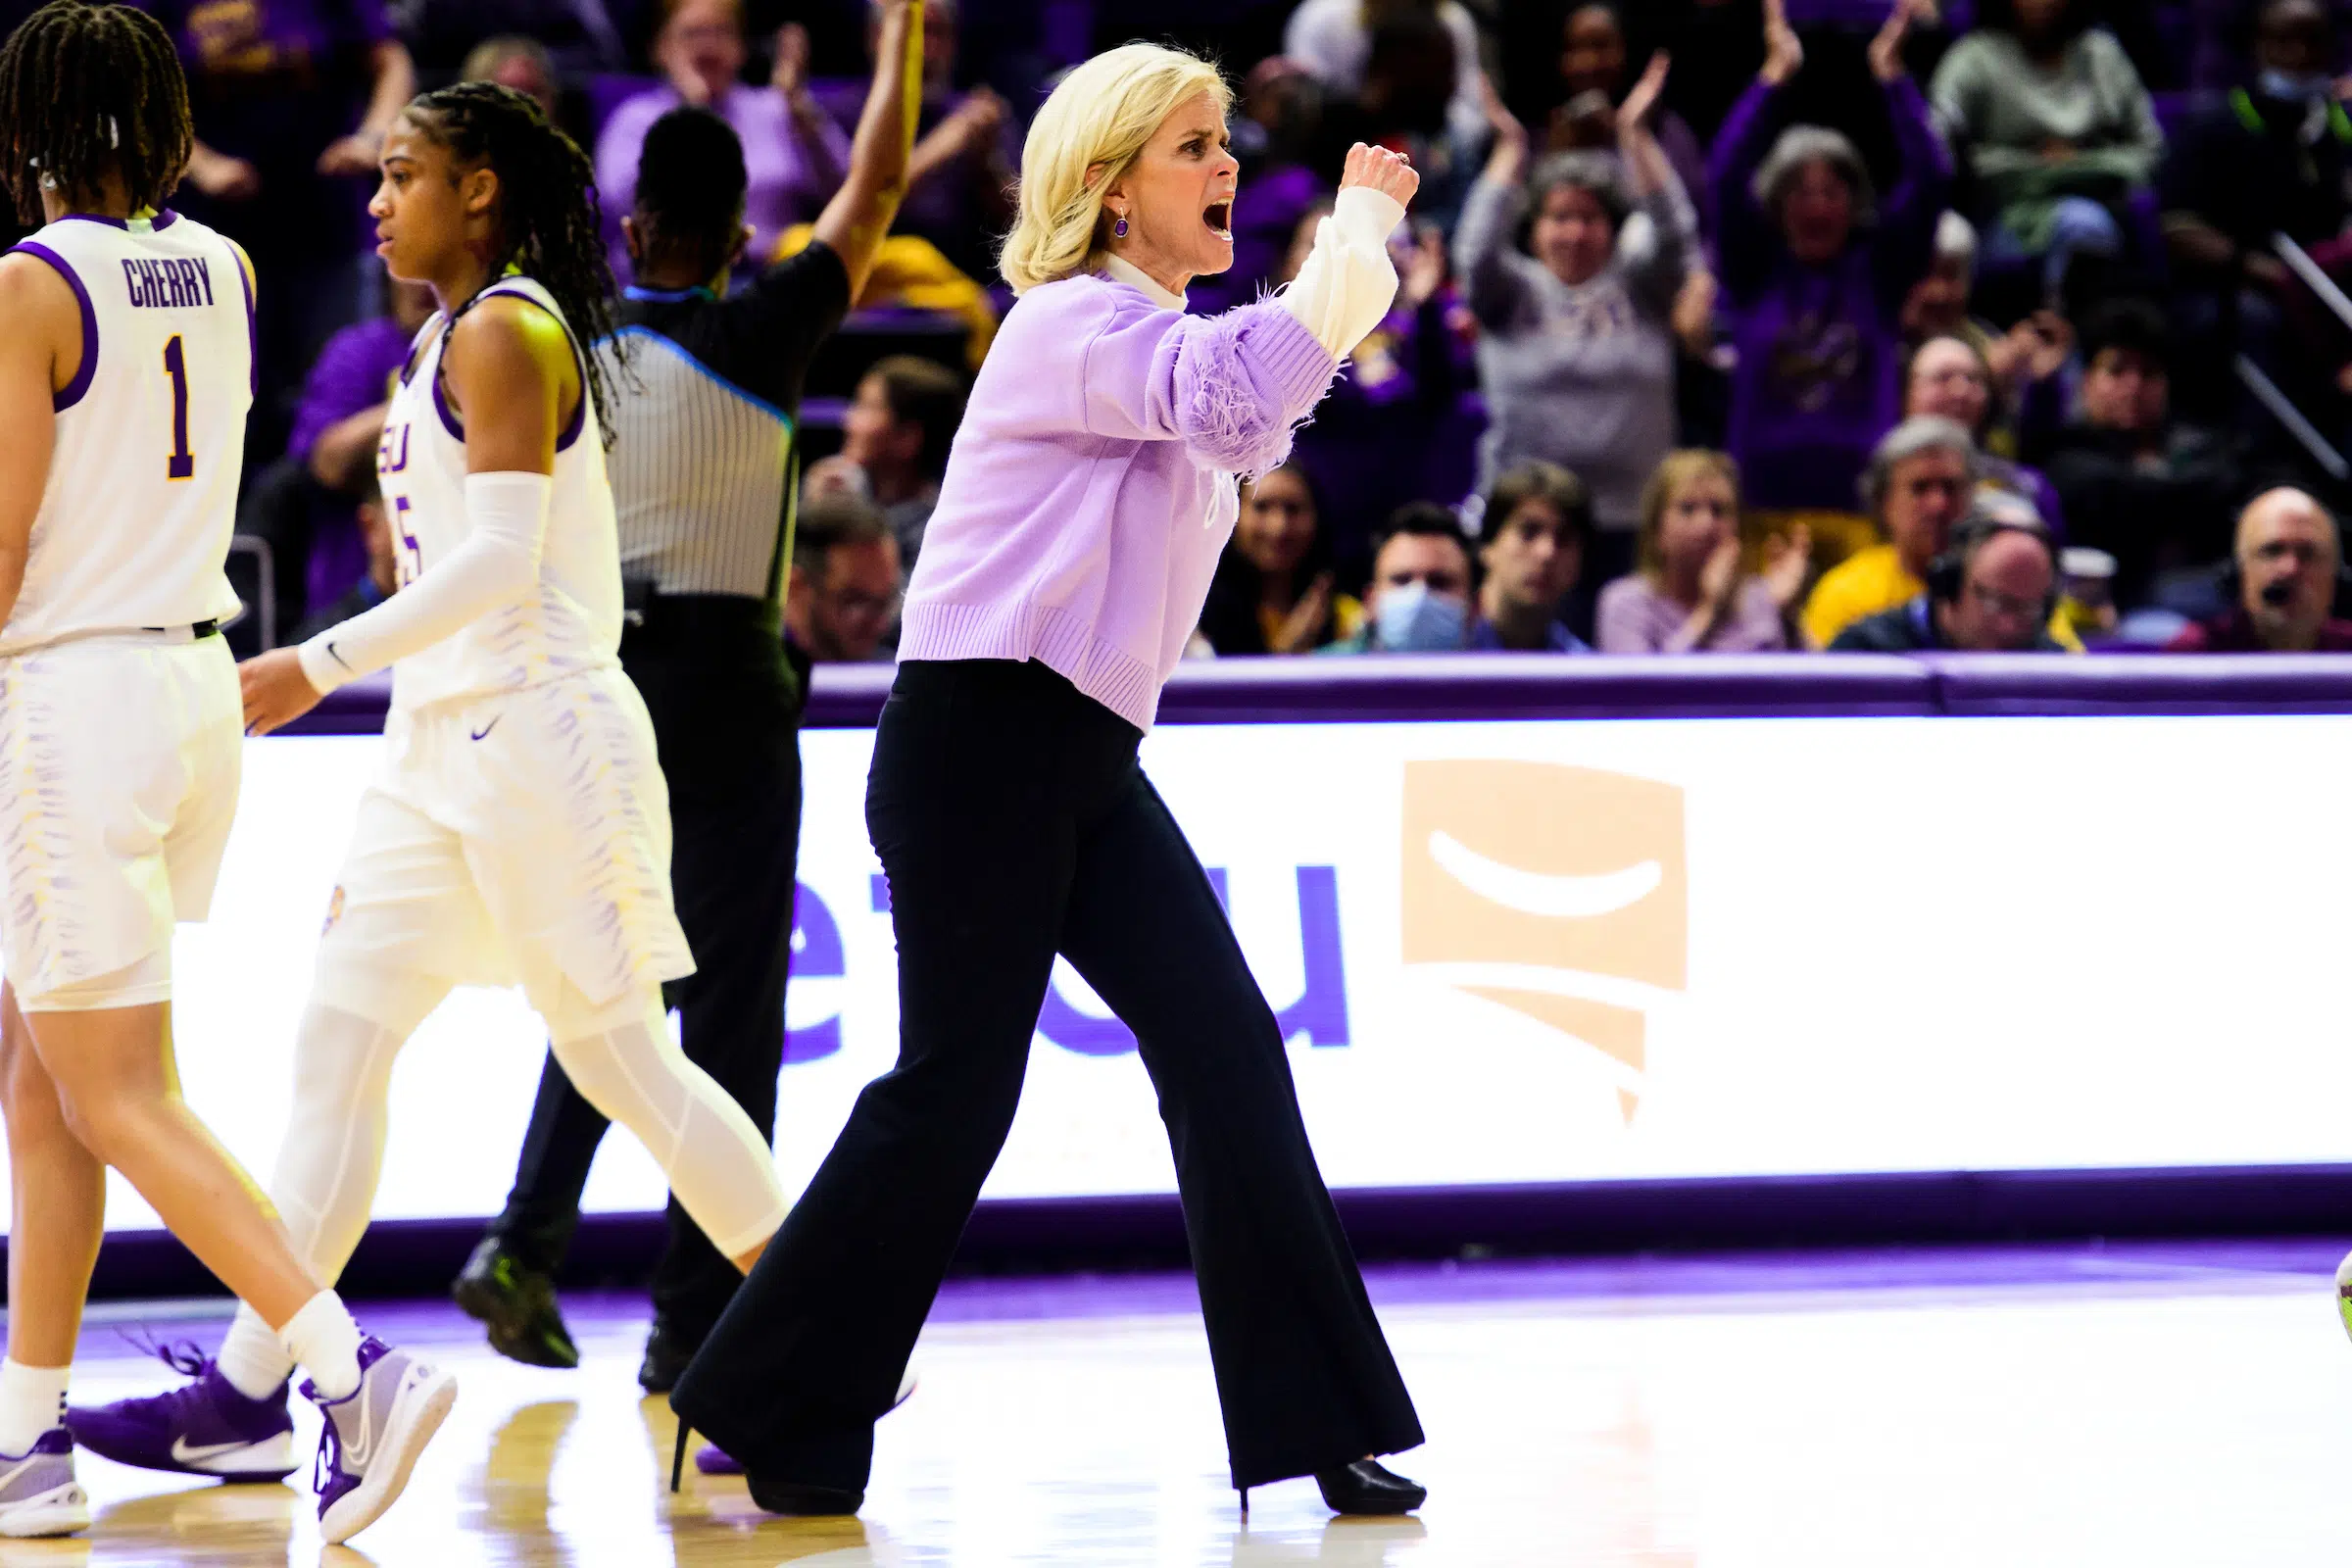 LSU's Mulkey to ink $32M deal, richest in women's hoops history